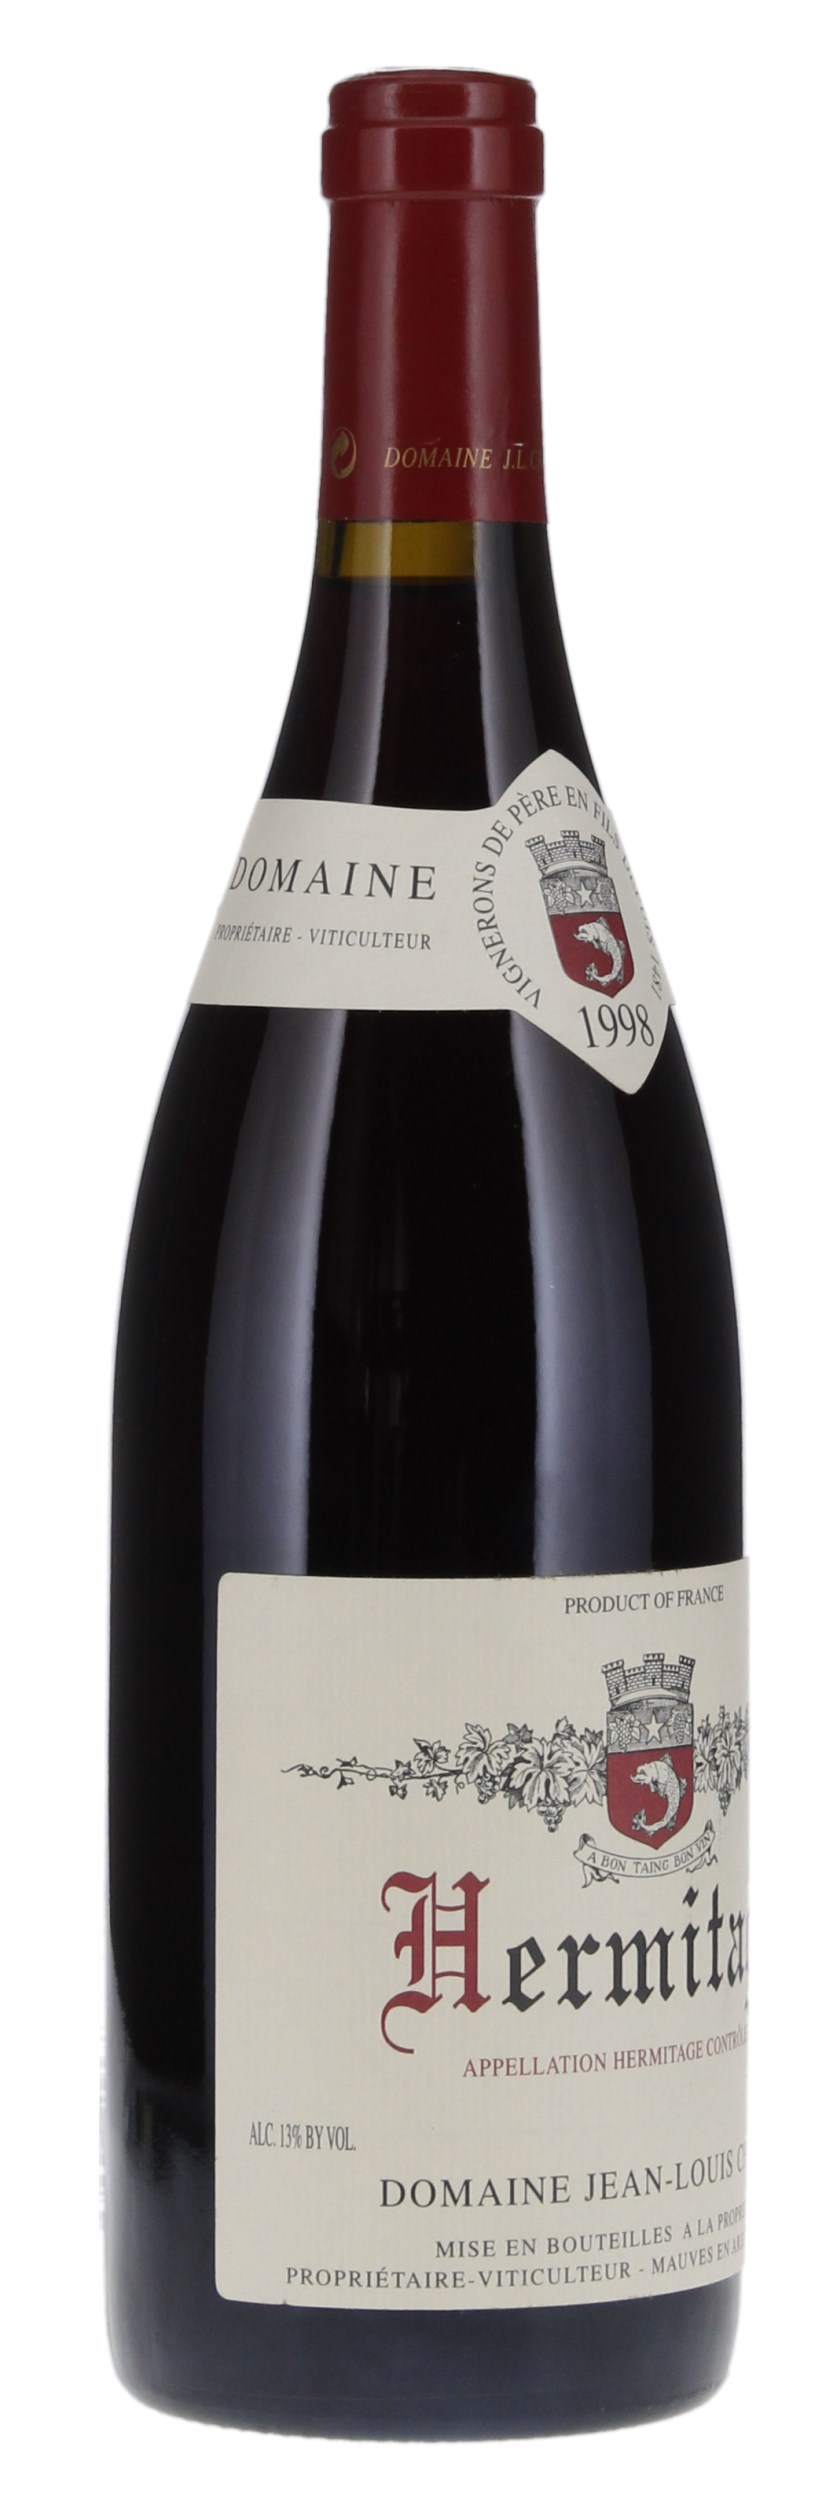 1998 Jean-Louis Chave Hermitage, 750ml